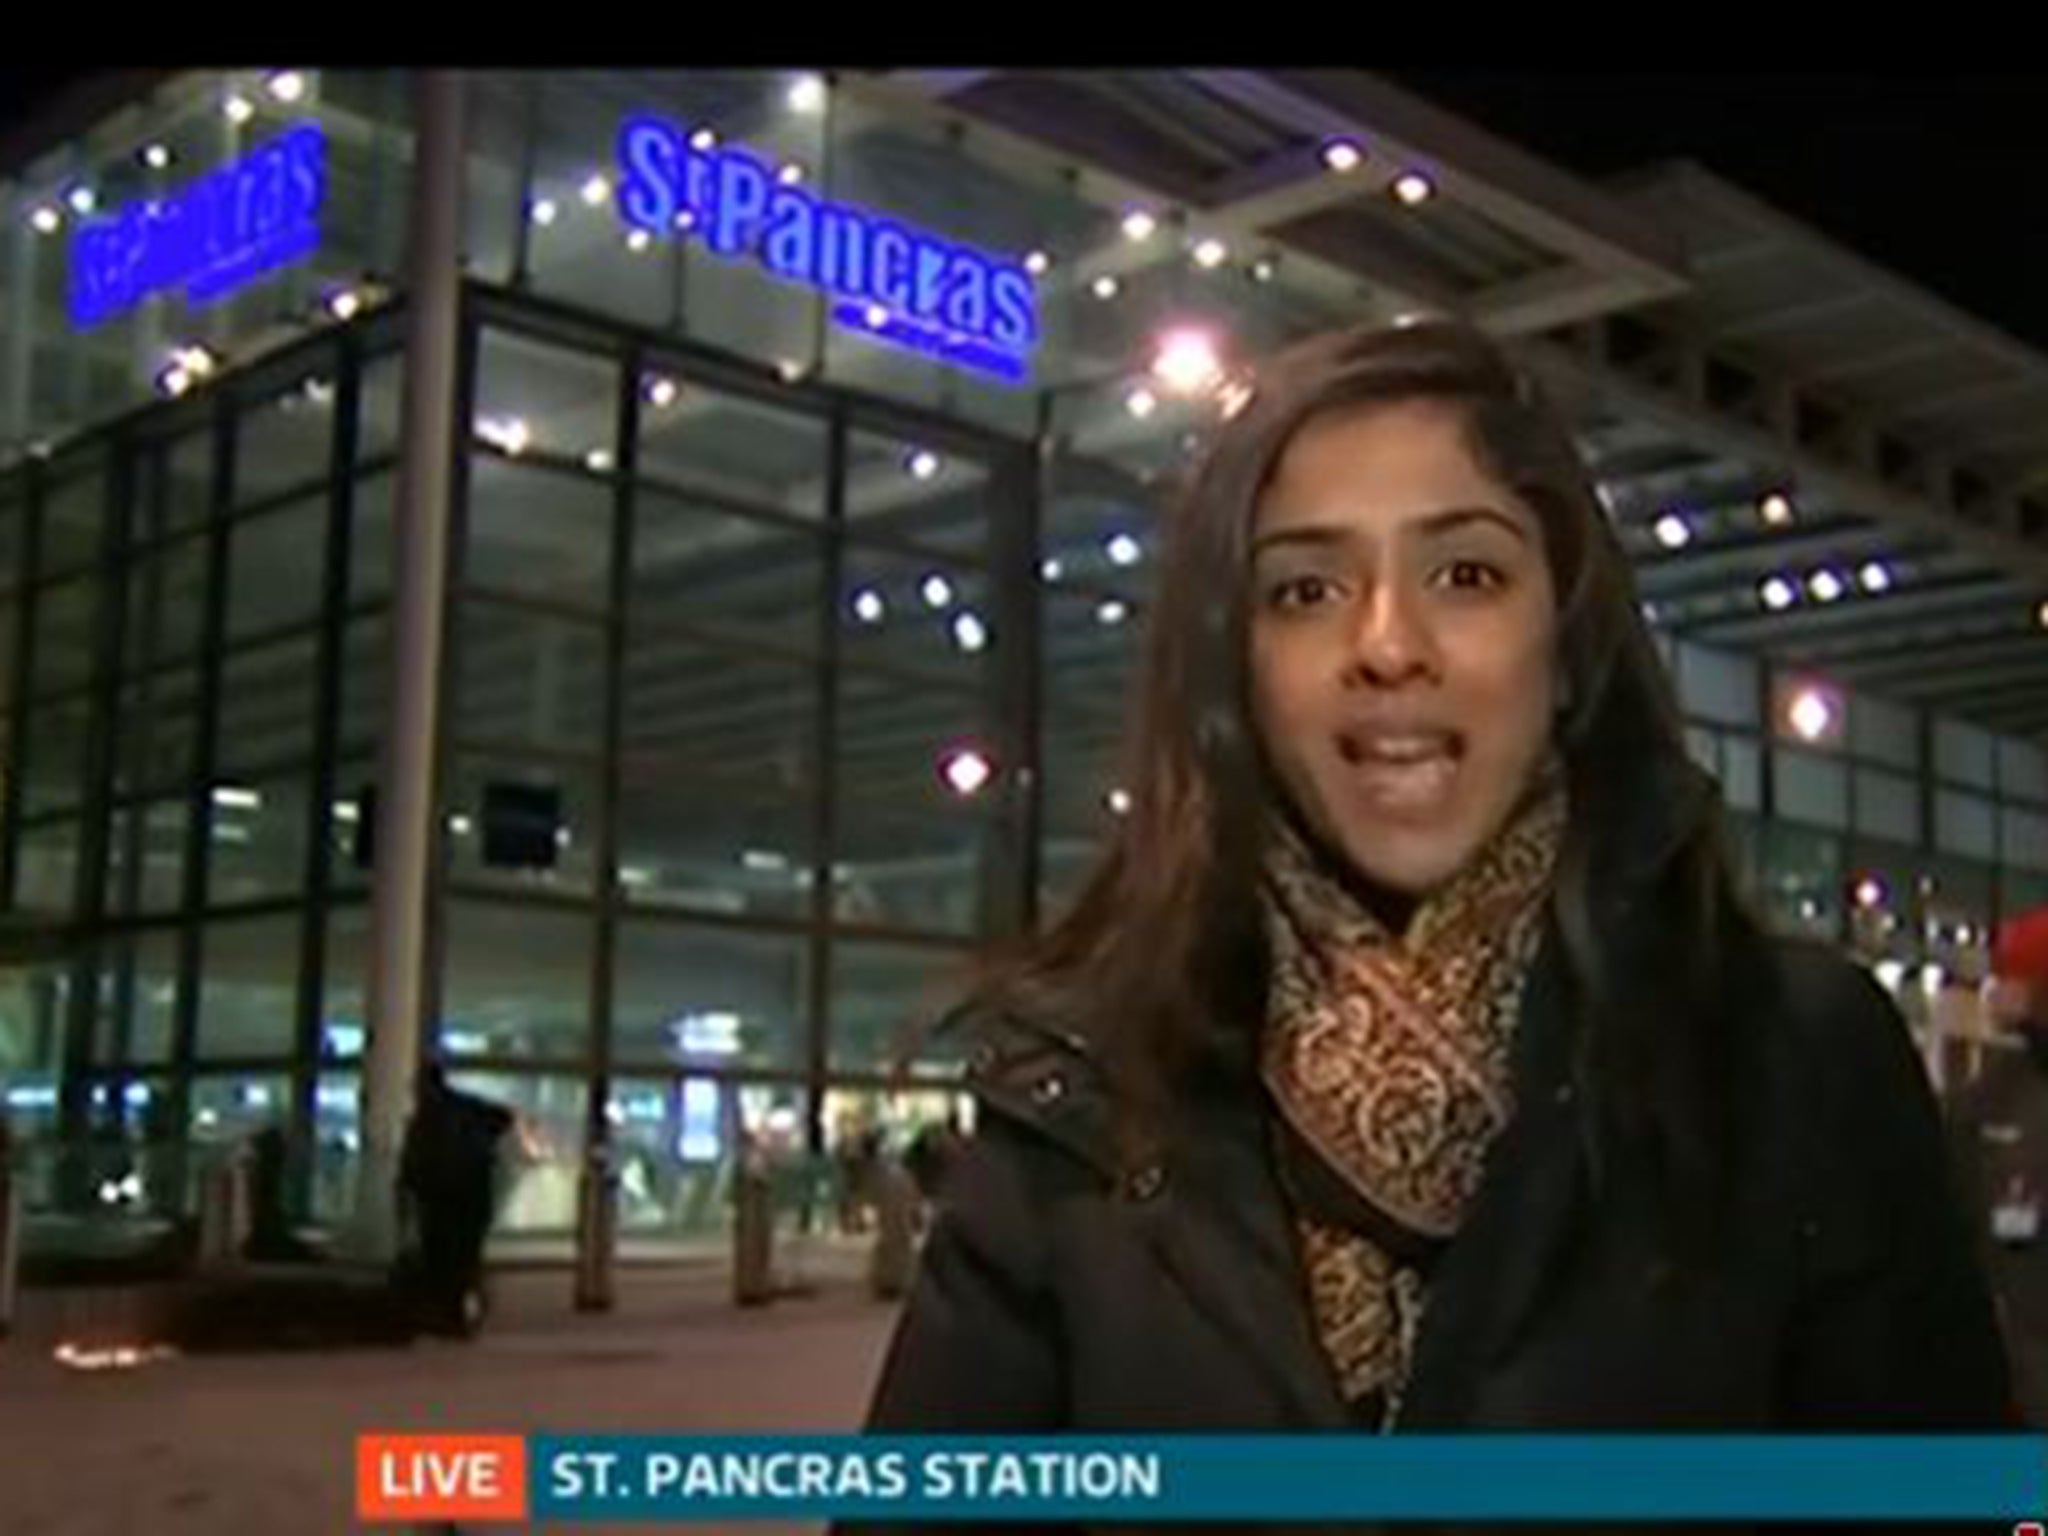 The collision outside St Pancras station (which can be seen in the bottom left hand corner of the screen) happened during a live broadcast